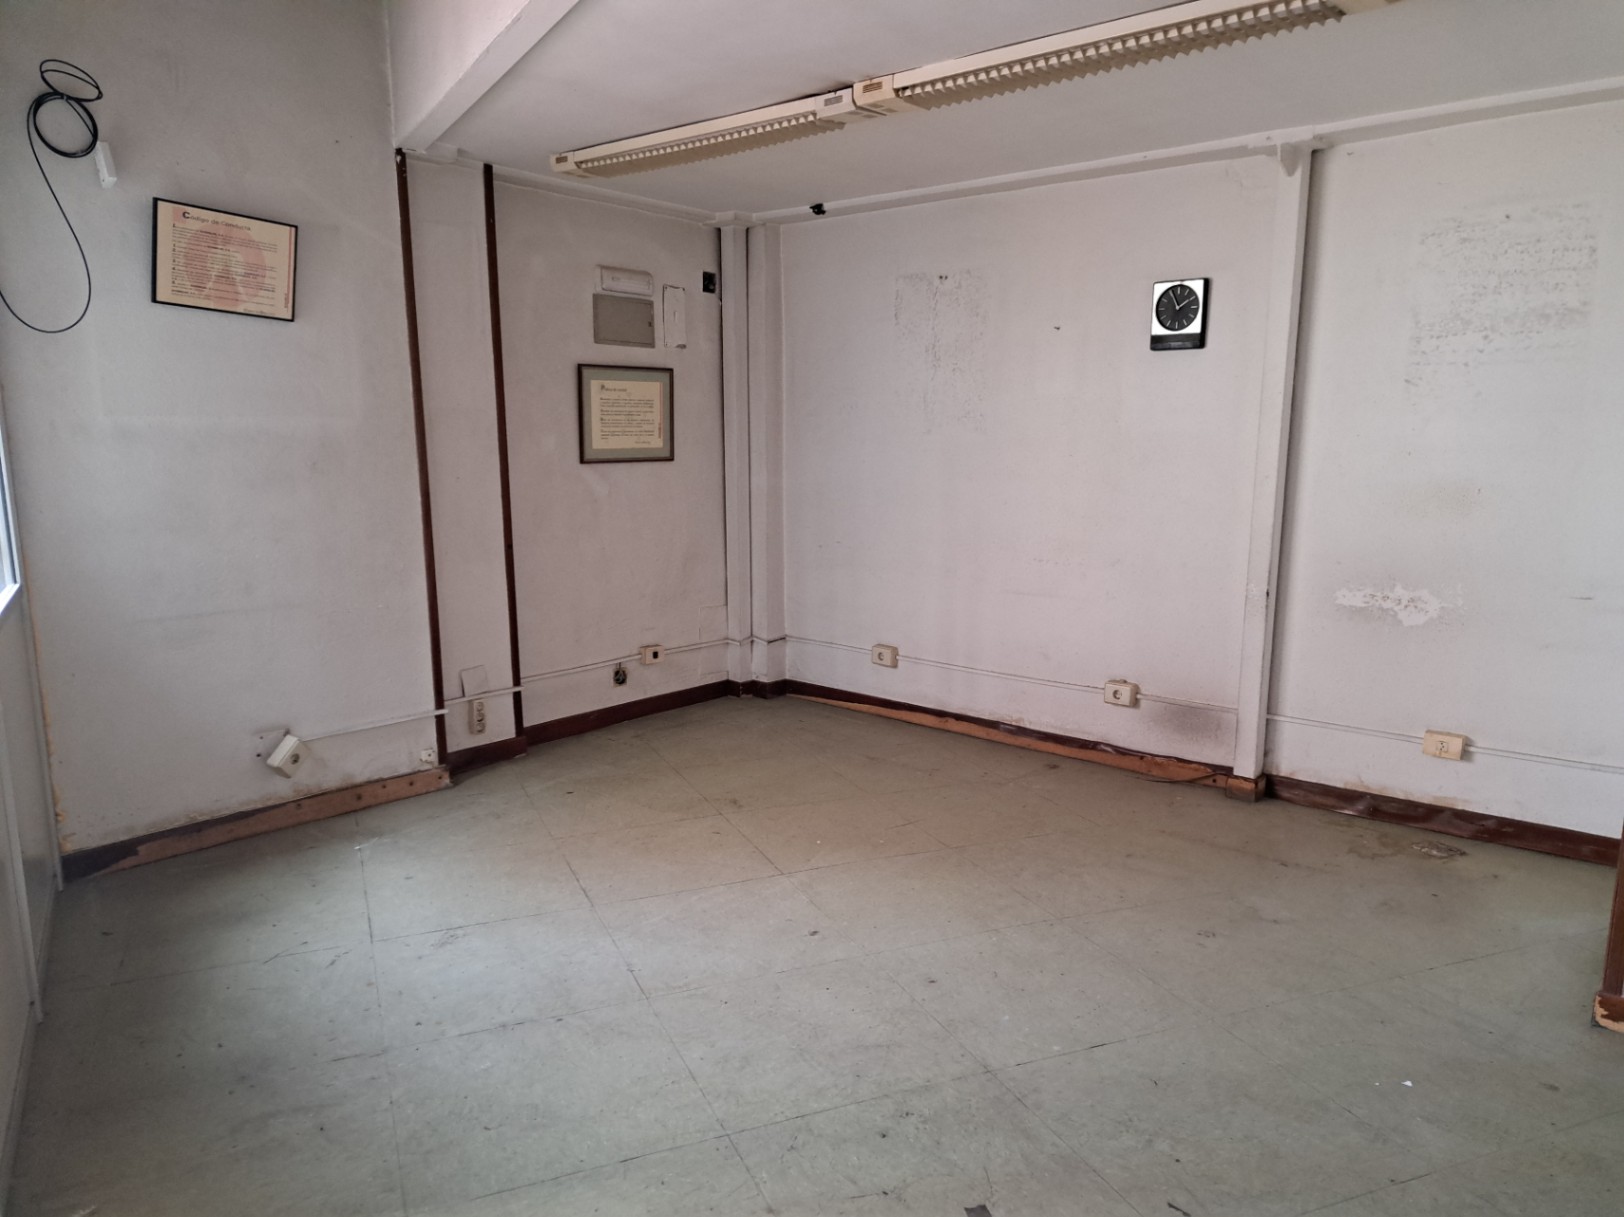 Commercial space for sale of 30 square meters with metal shutter